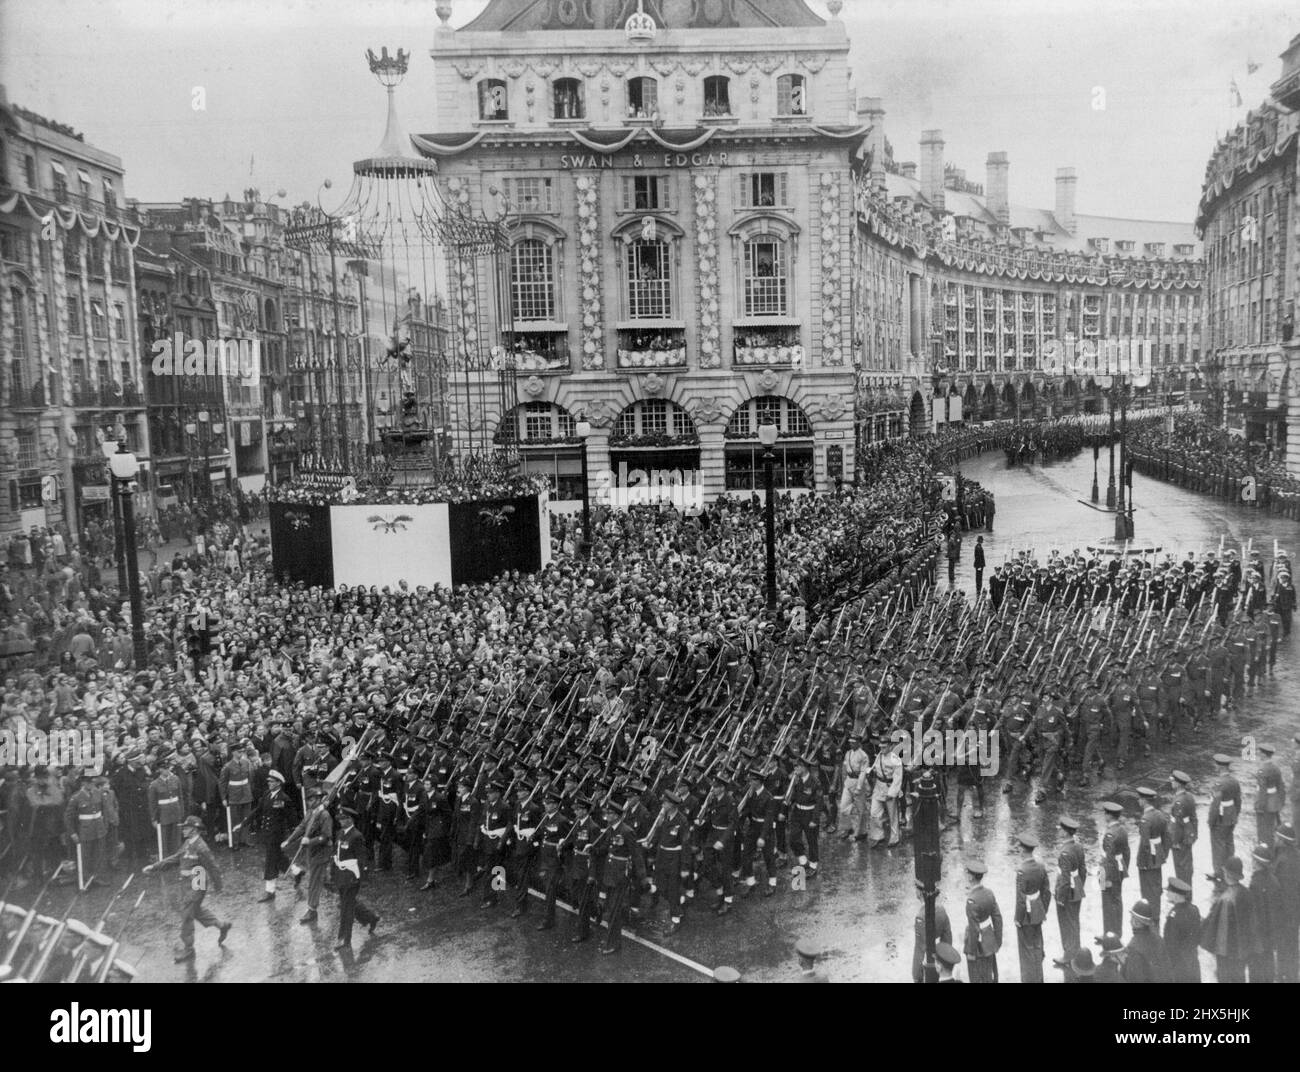 The Coronation Procession -- The Australian contingent marching through Piccadilly Circus in the Coronation procession on it way back to Buckingham Palace from Westminster Abbey after the Coronation ceremony to-day June 2. June 10, 1953. Stock Photo